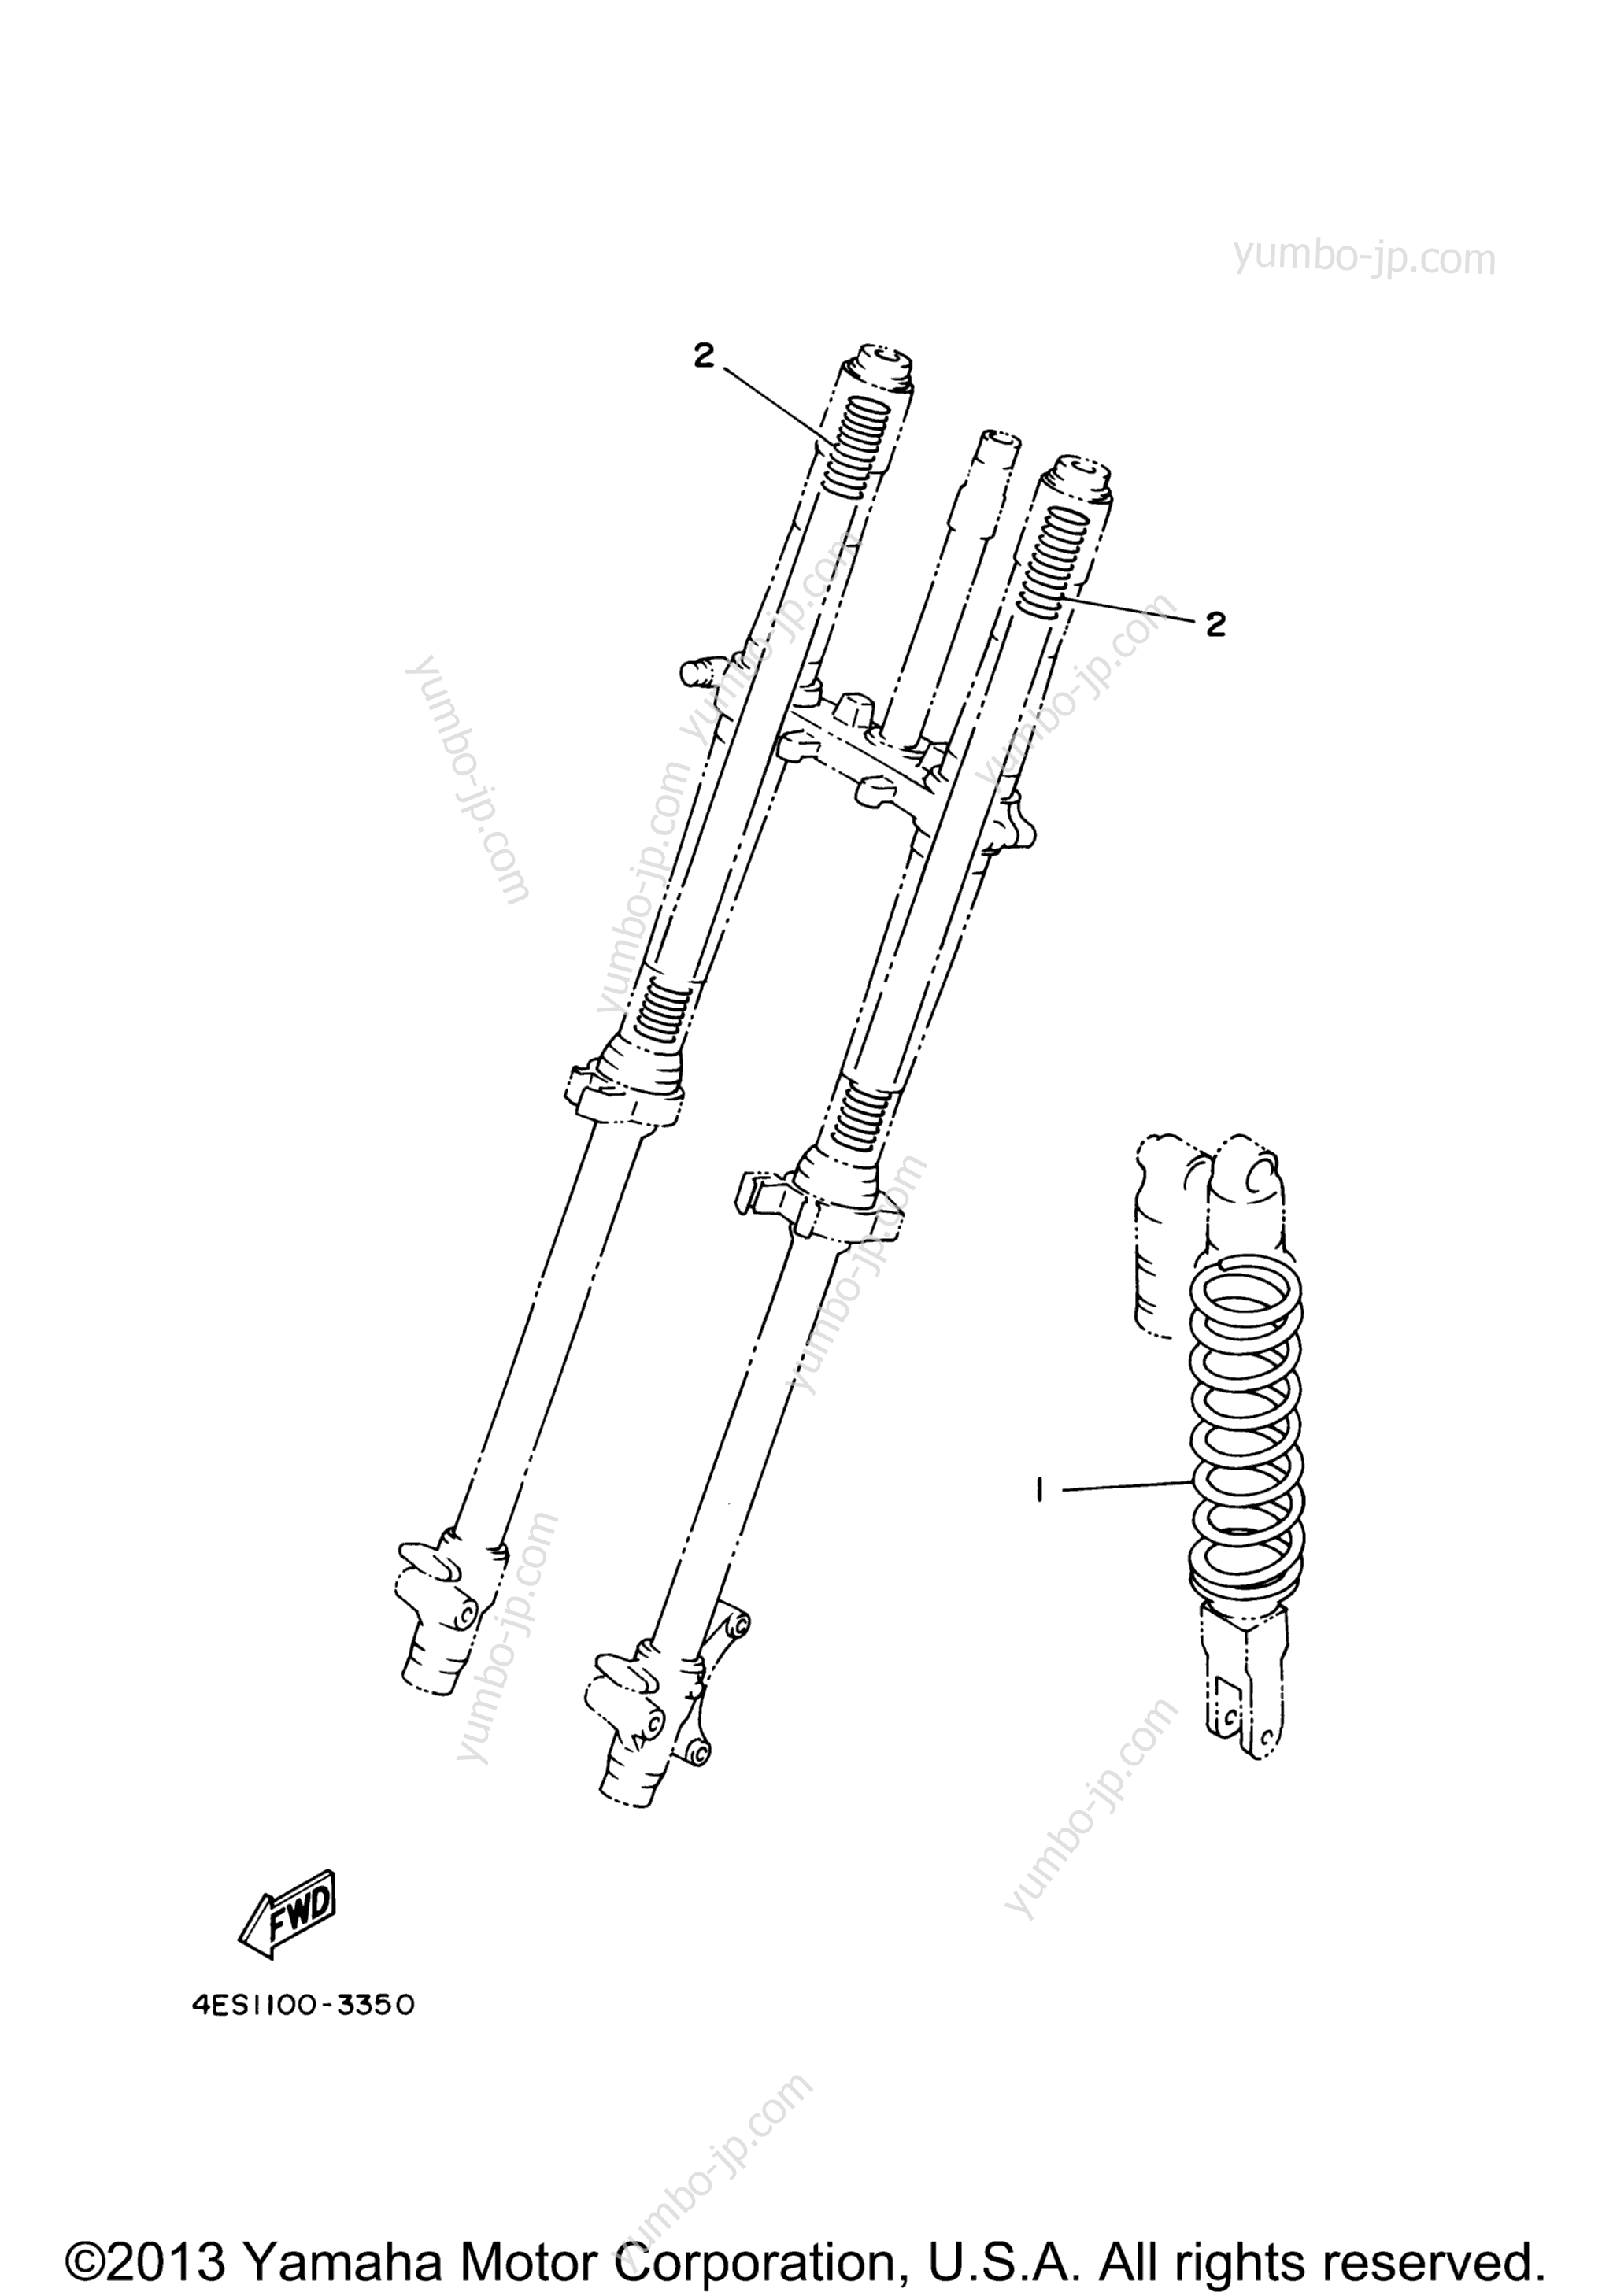 Alternate For Chassis for motorcycles YAMAHA YZ85 (YZ85A) 2011 year